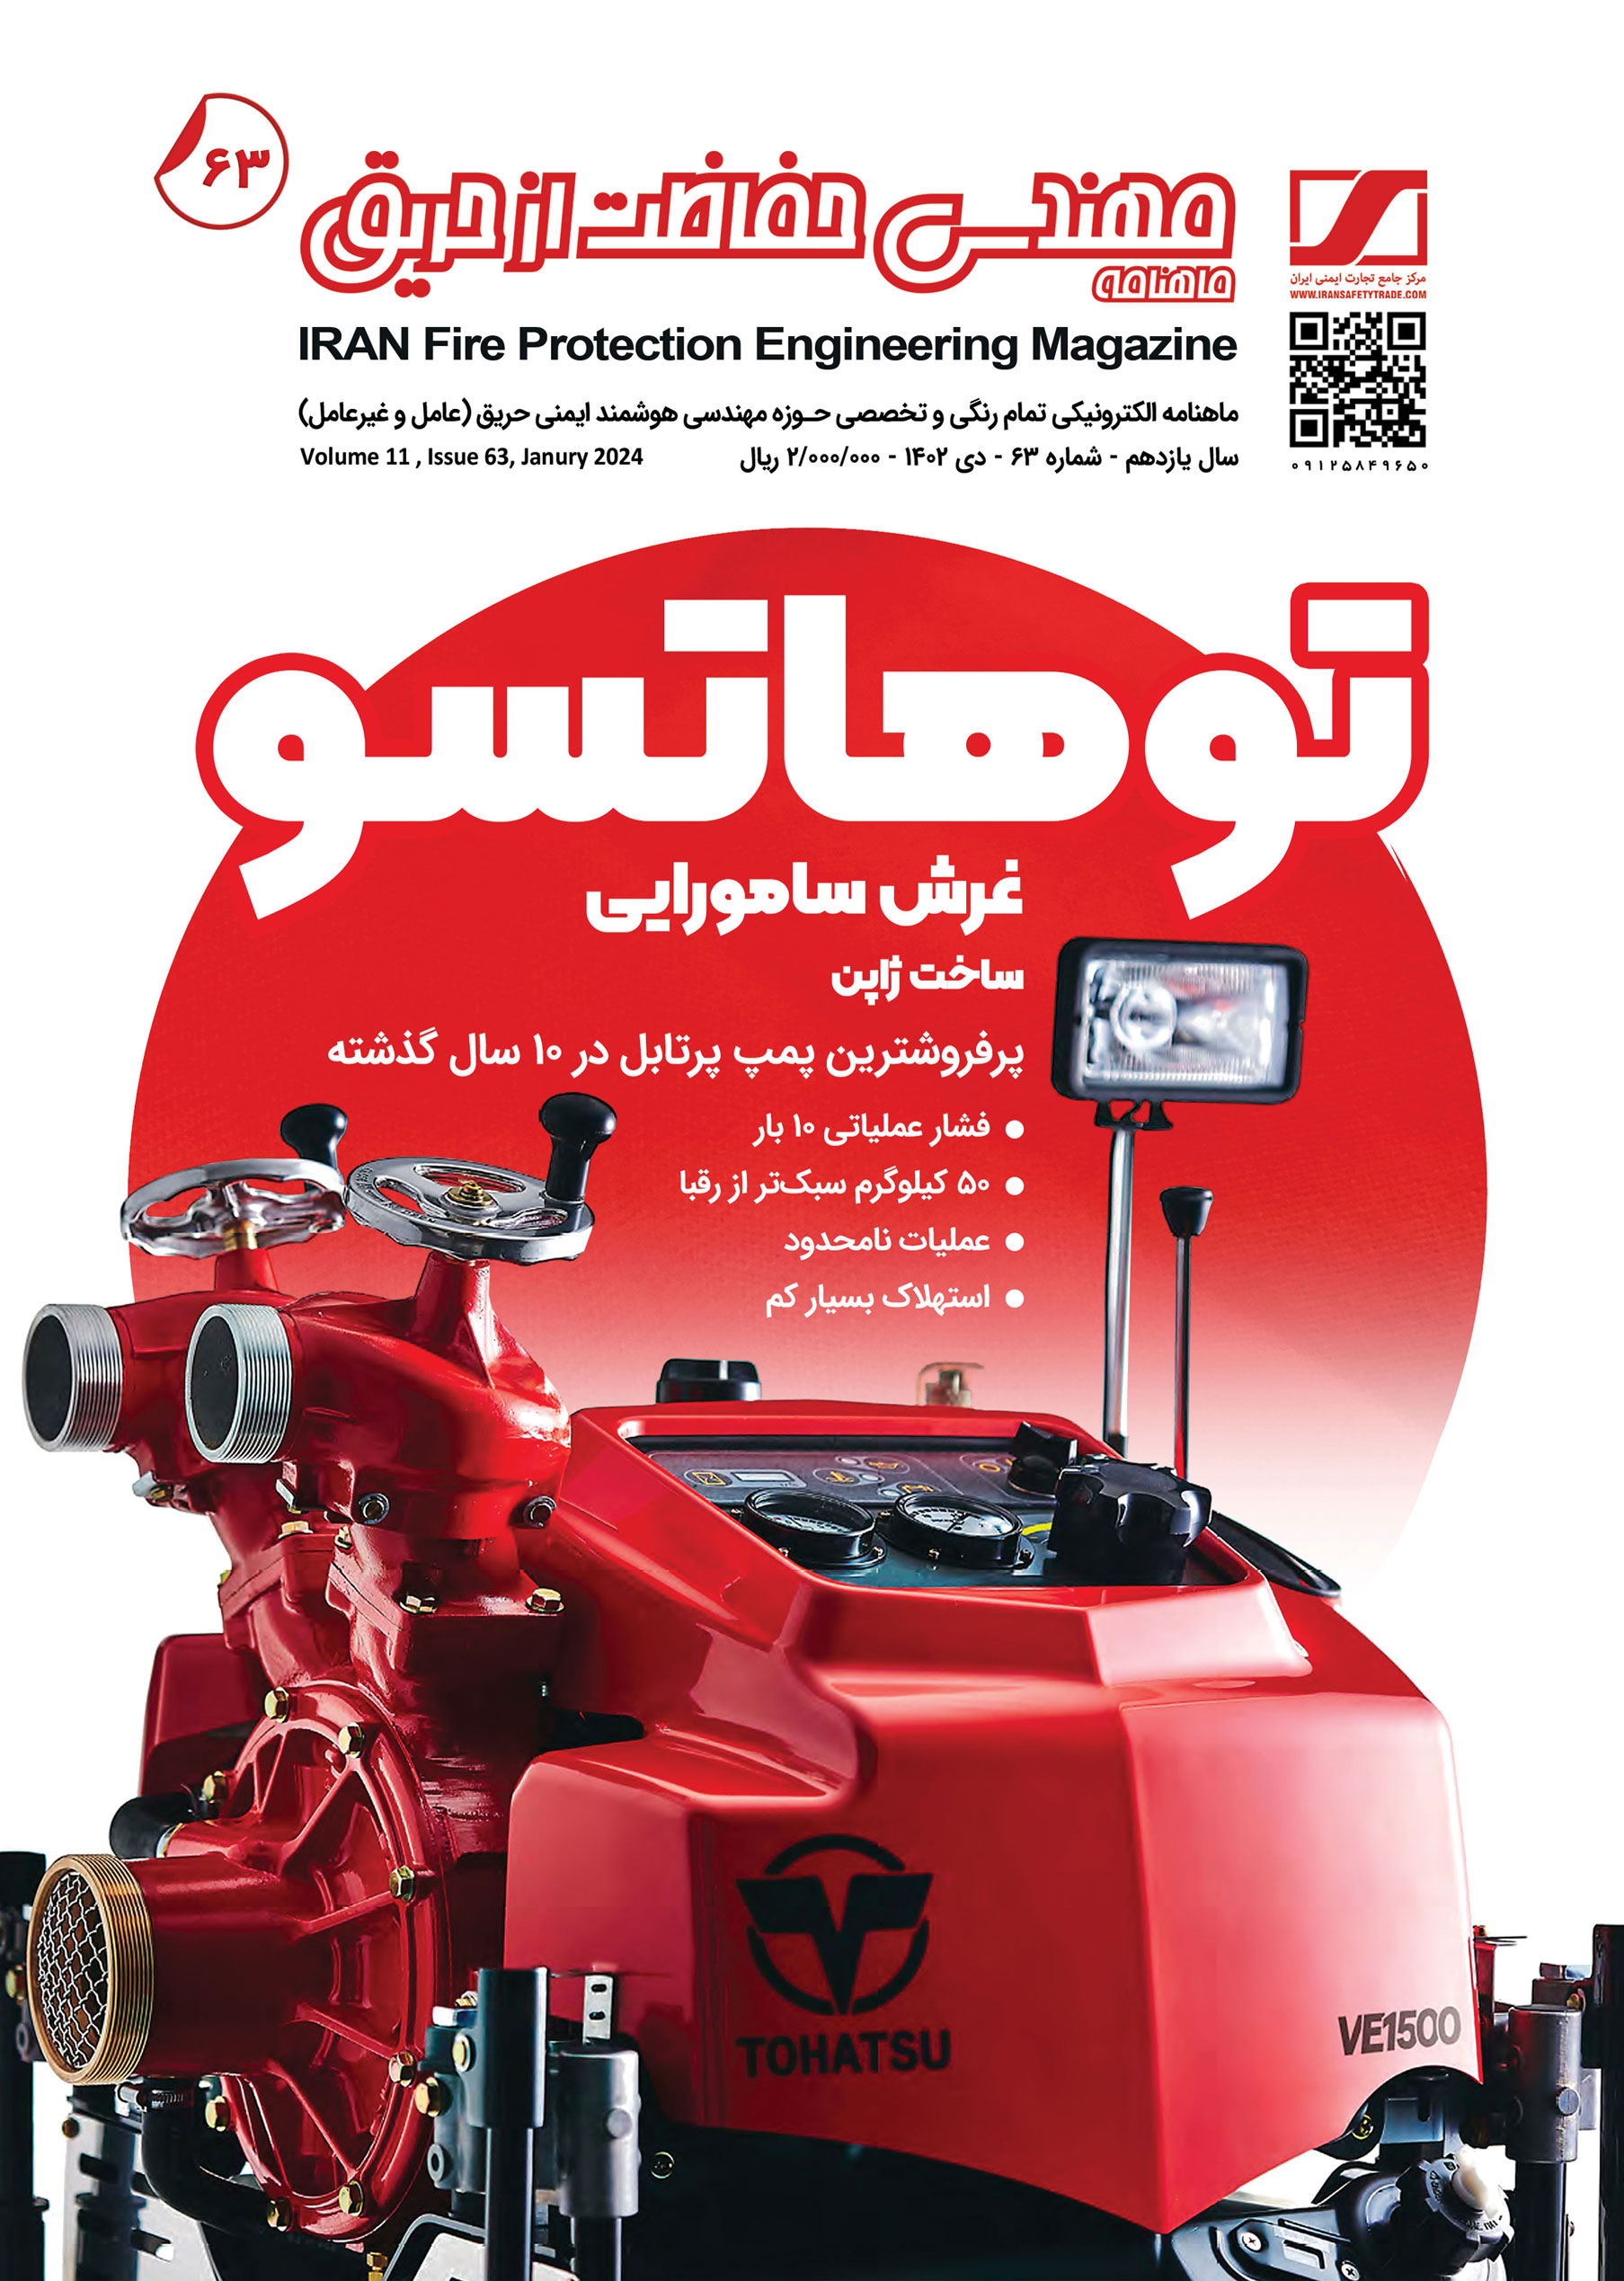 Cover 63